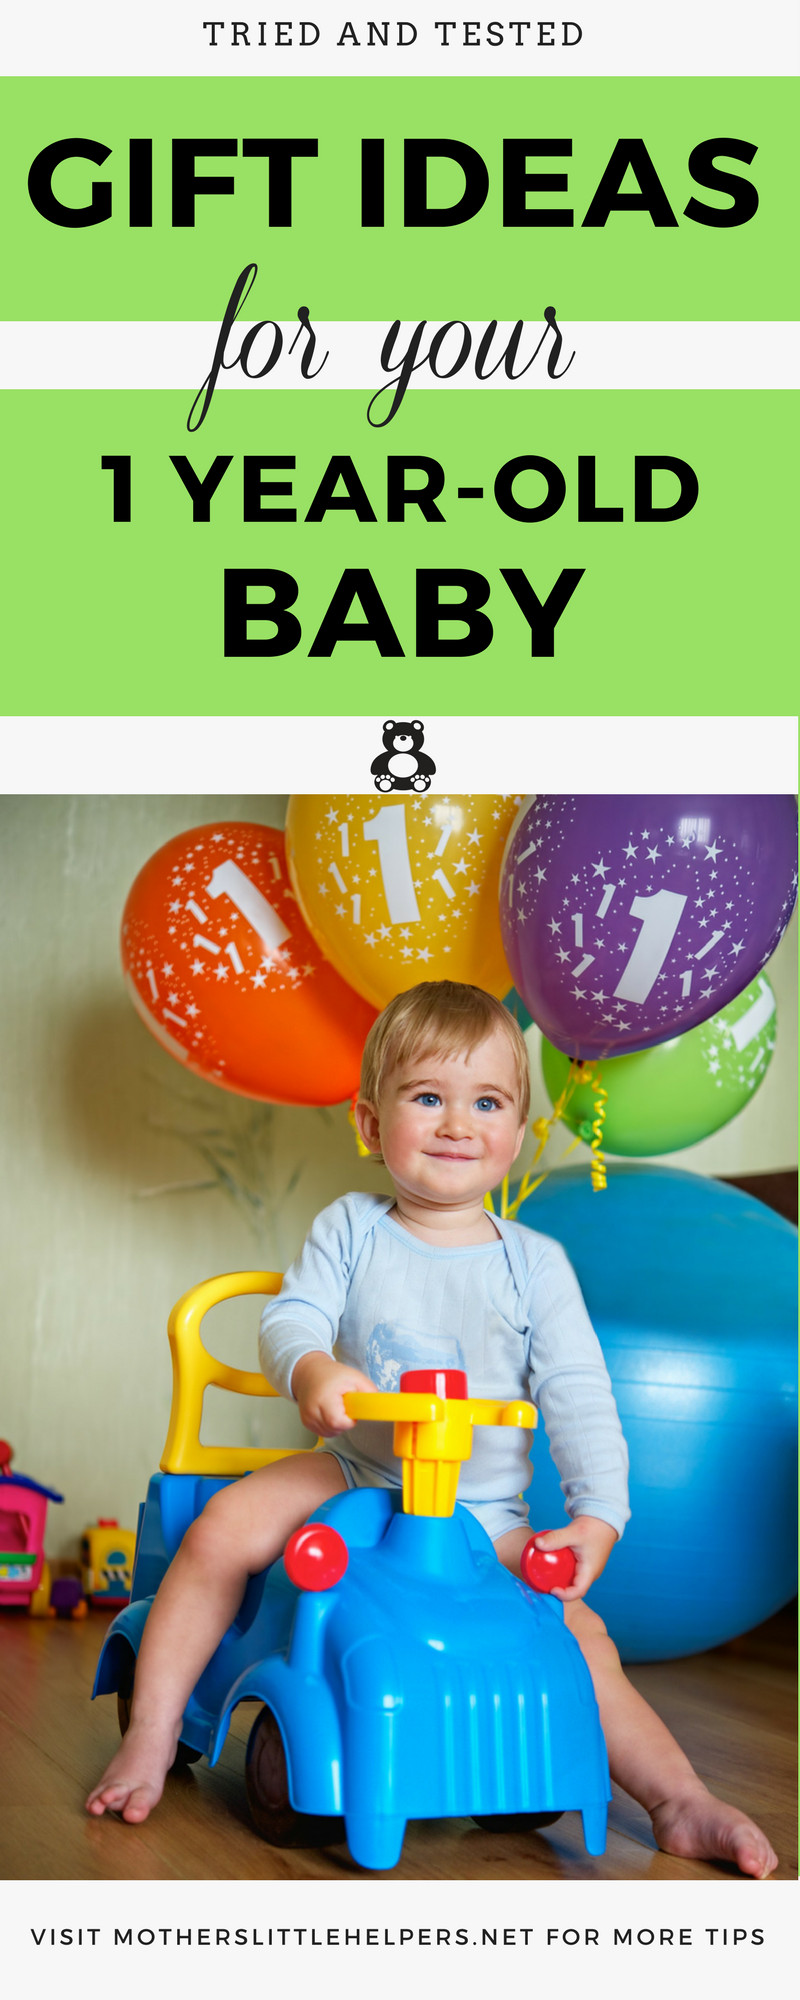 Best Gifts For One Year Old Baby
 Best Gift for e Year Old Baby Gift Guide 2019